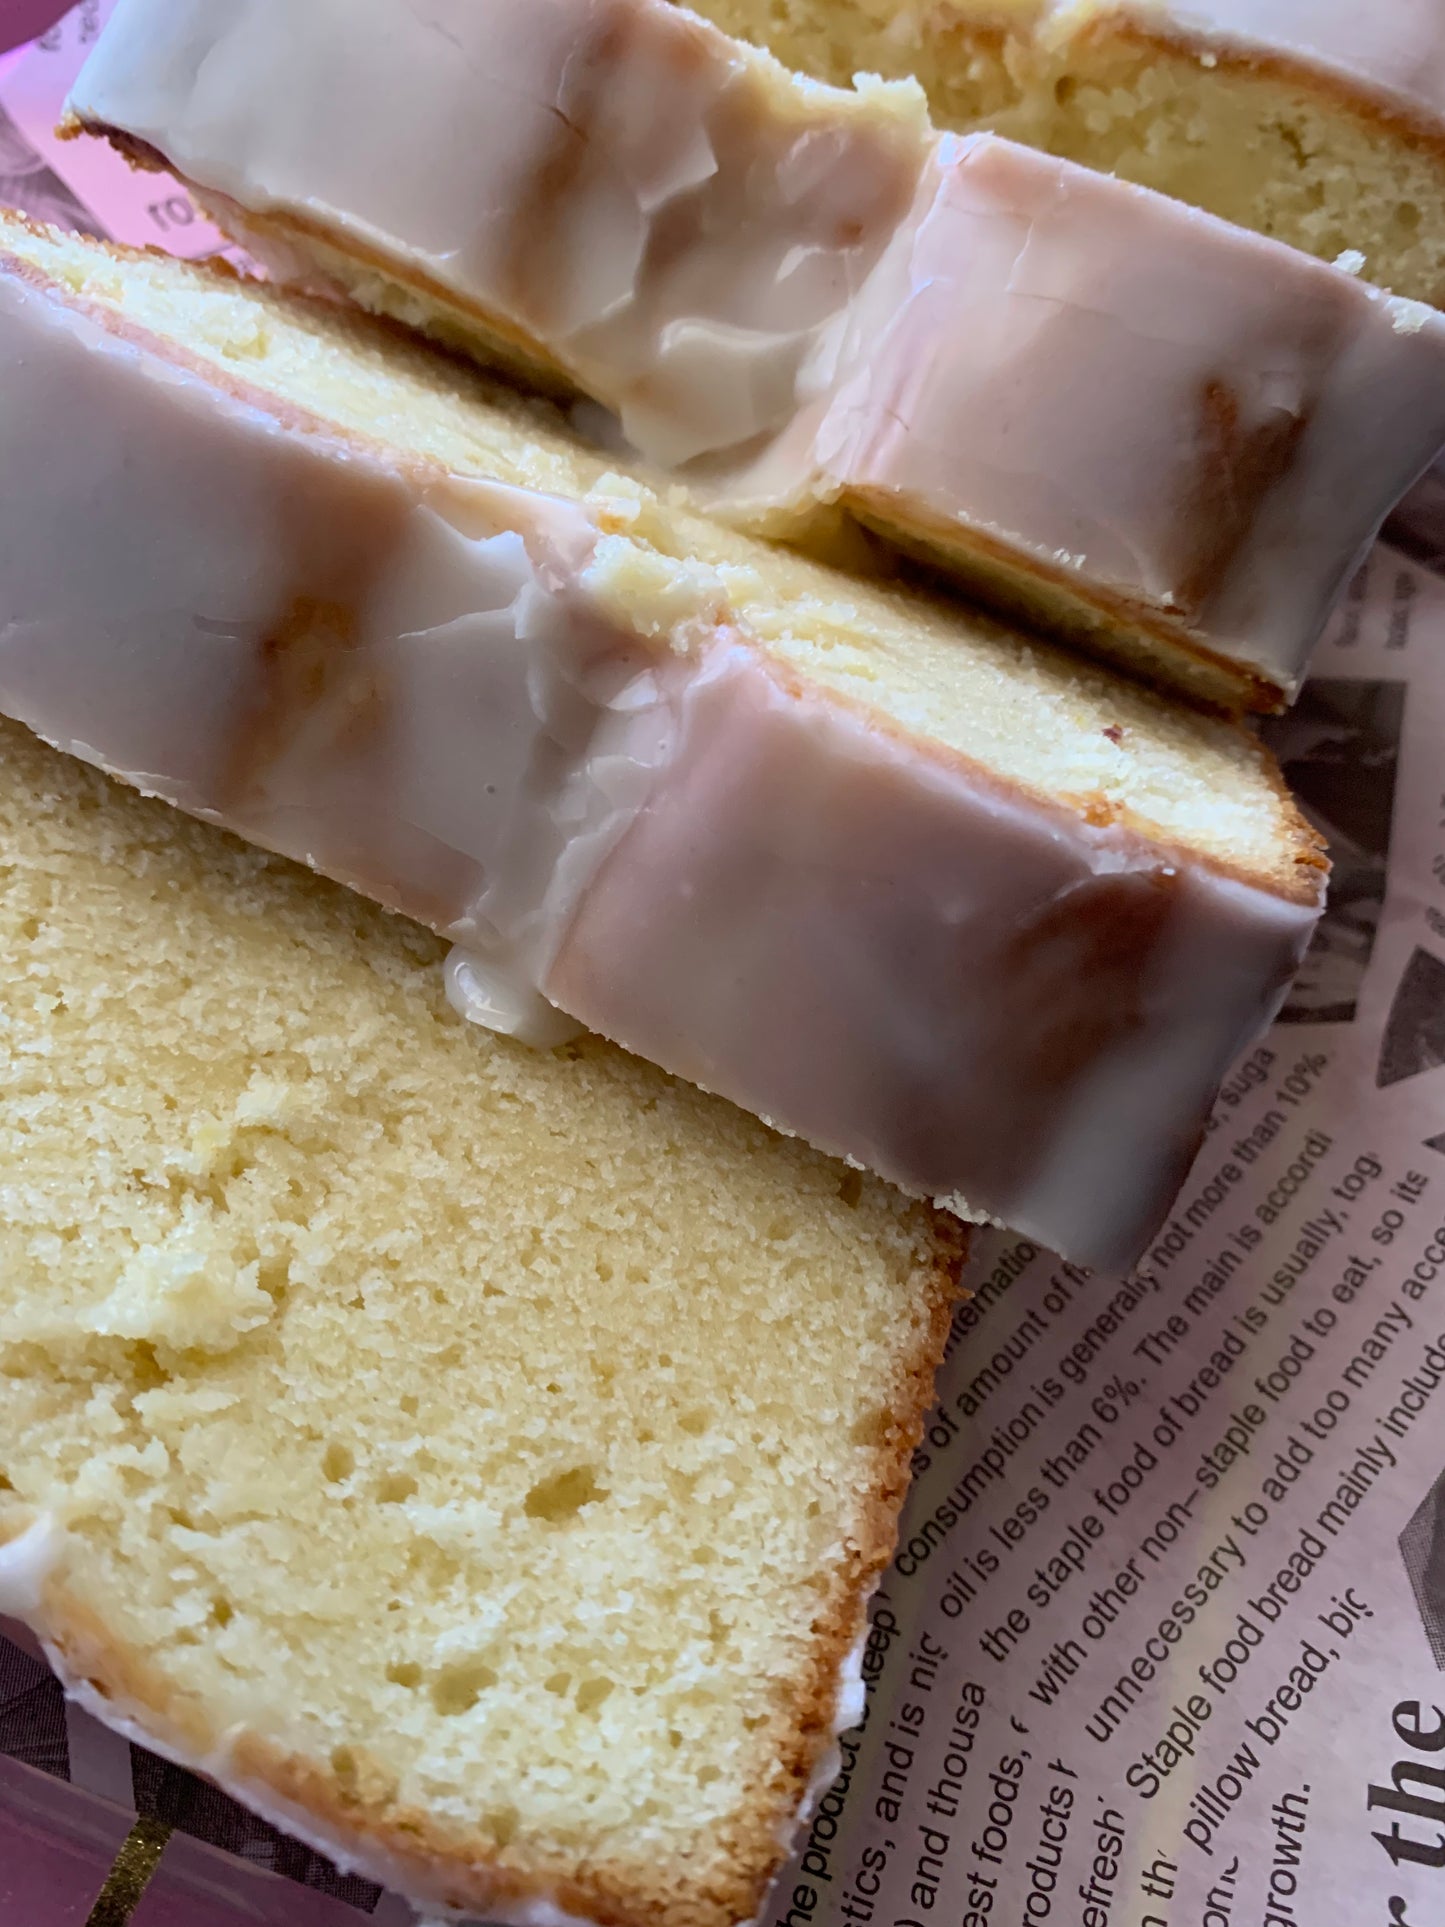 Gourmet “Fancy Pants” Loaf Pound Cakes